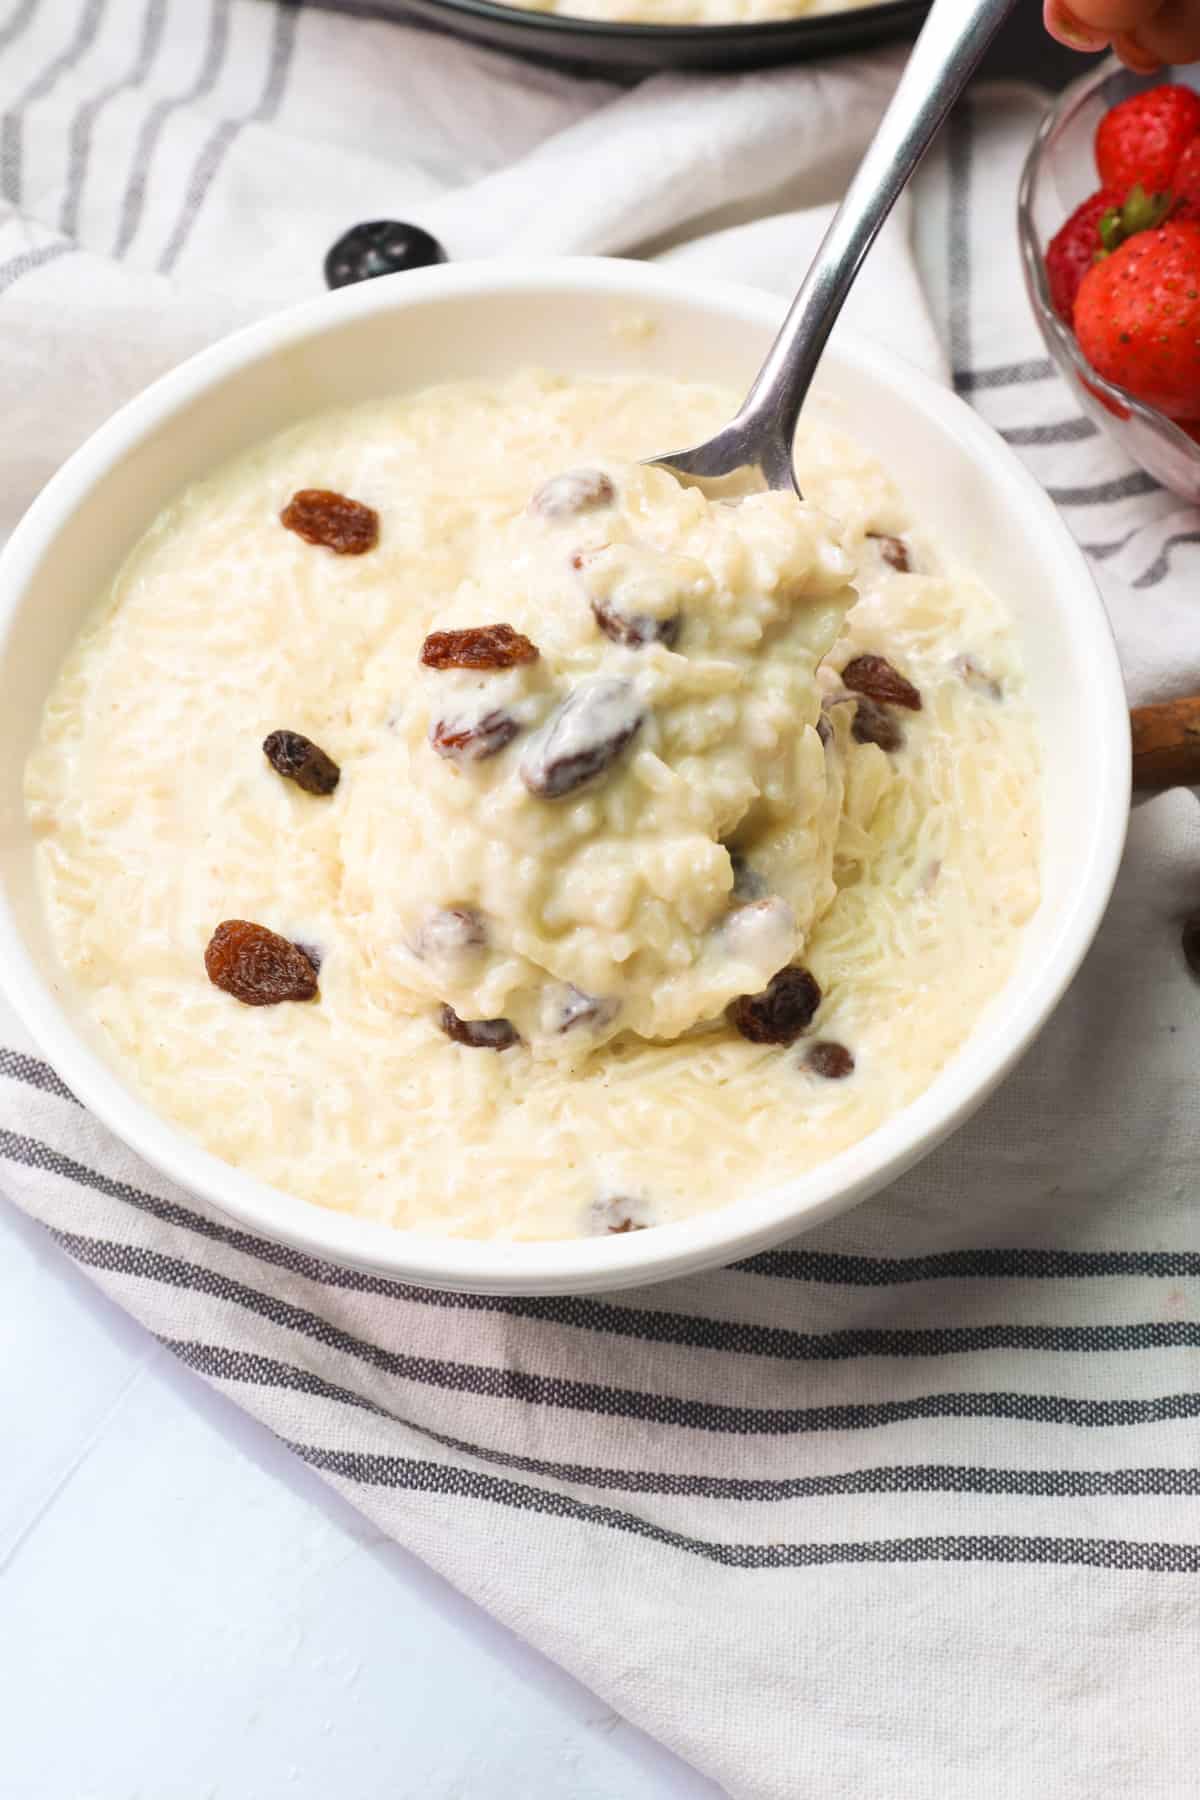 Rice pudding makes a creamy, quick, and easy treat